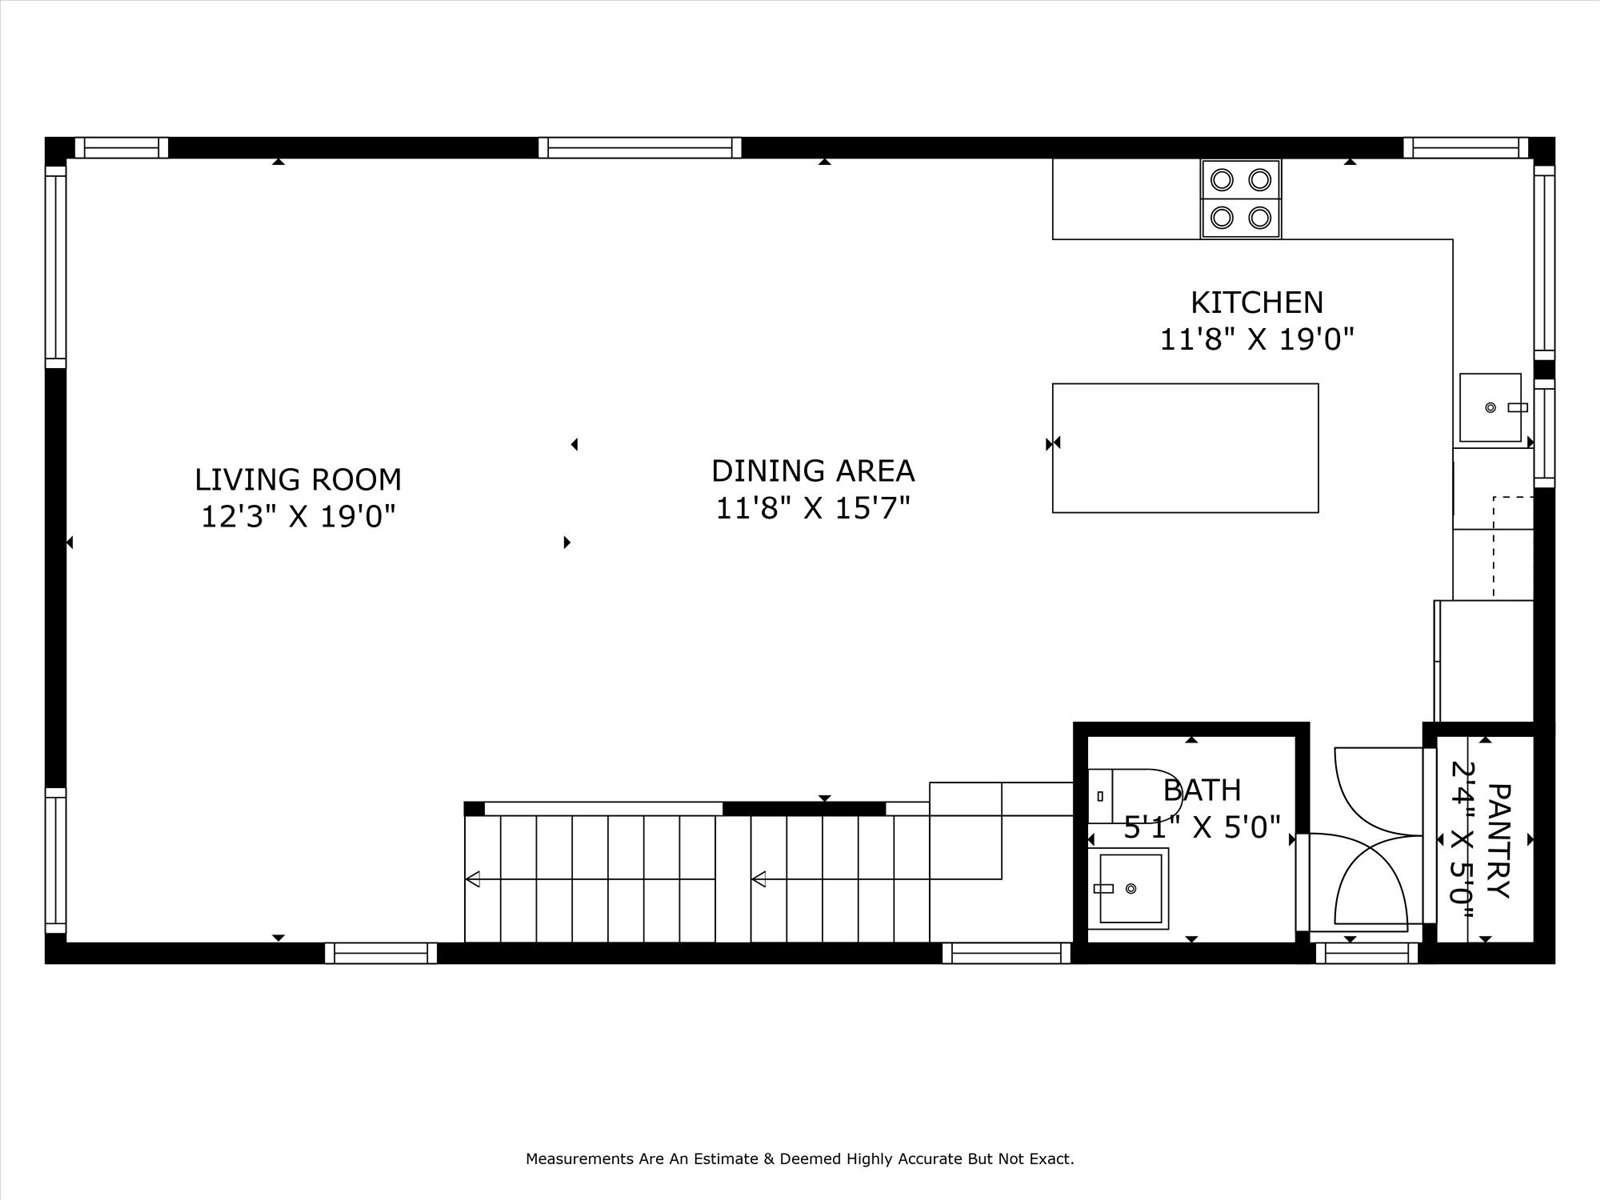 The floorplan of the second floor at 420 26th Ave S #B Seattle WA 98144